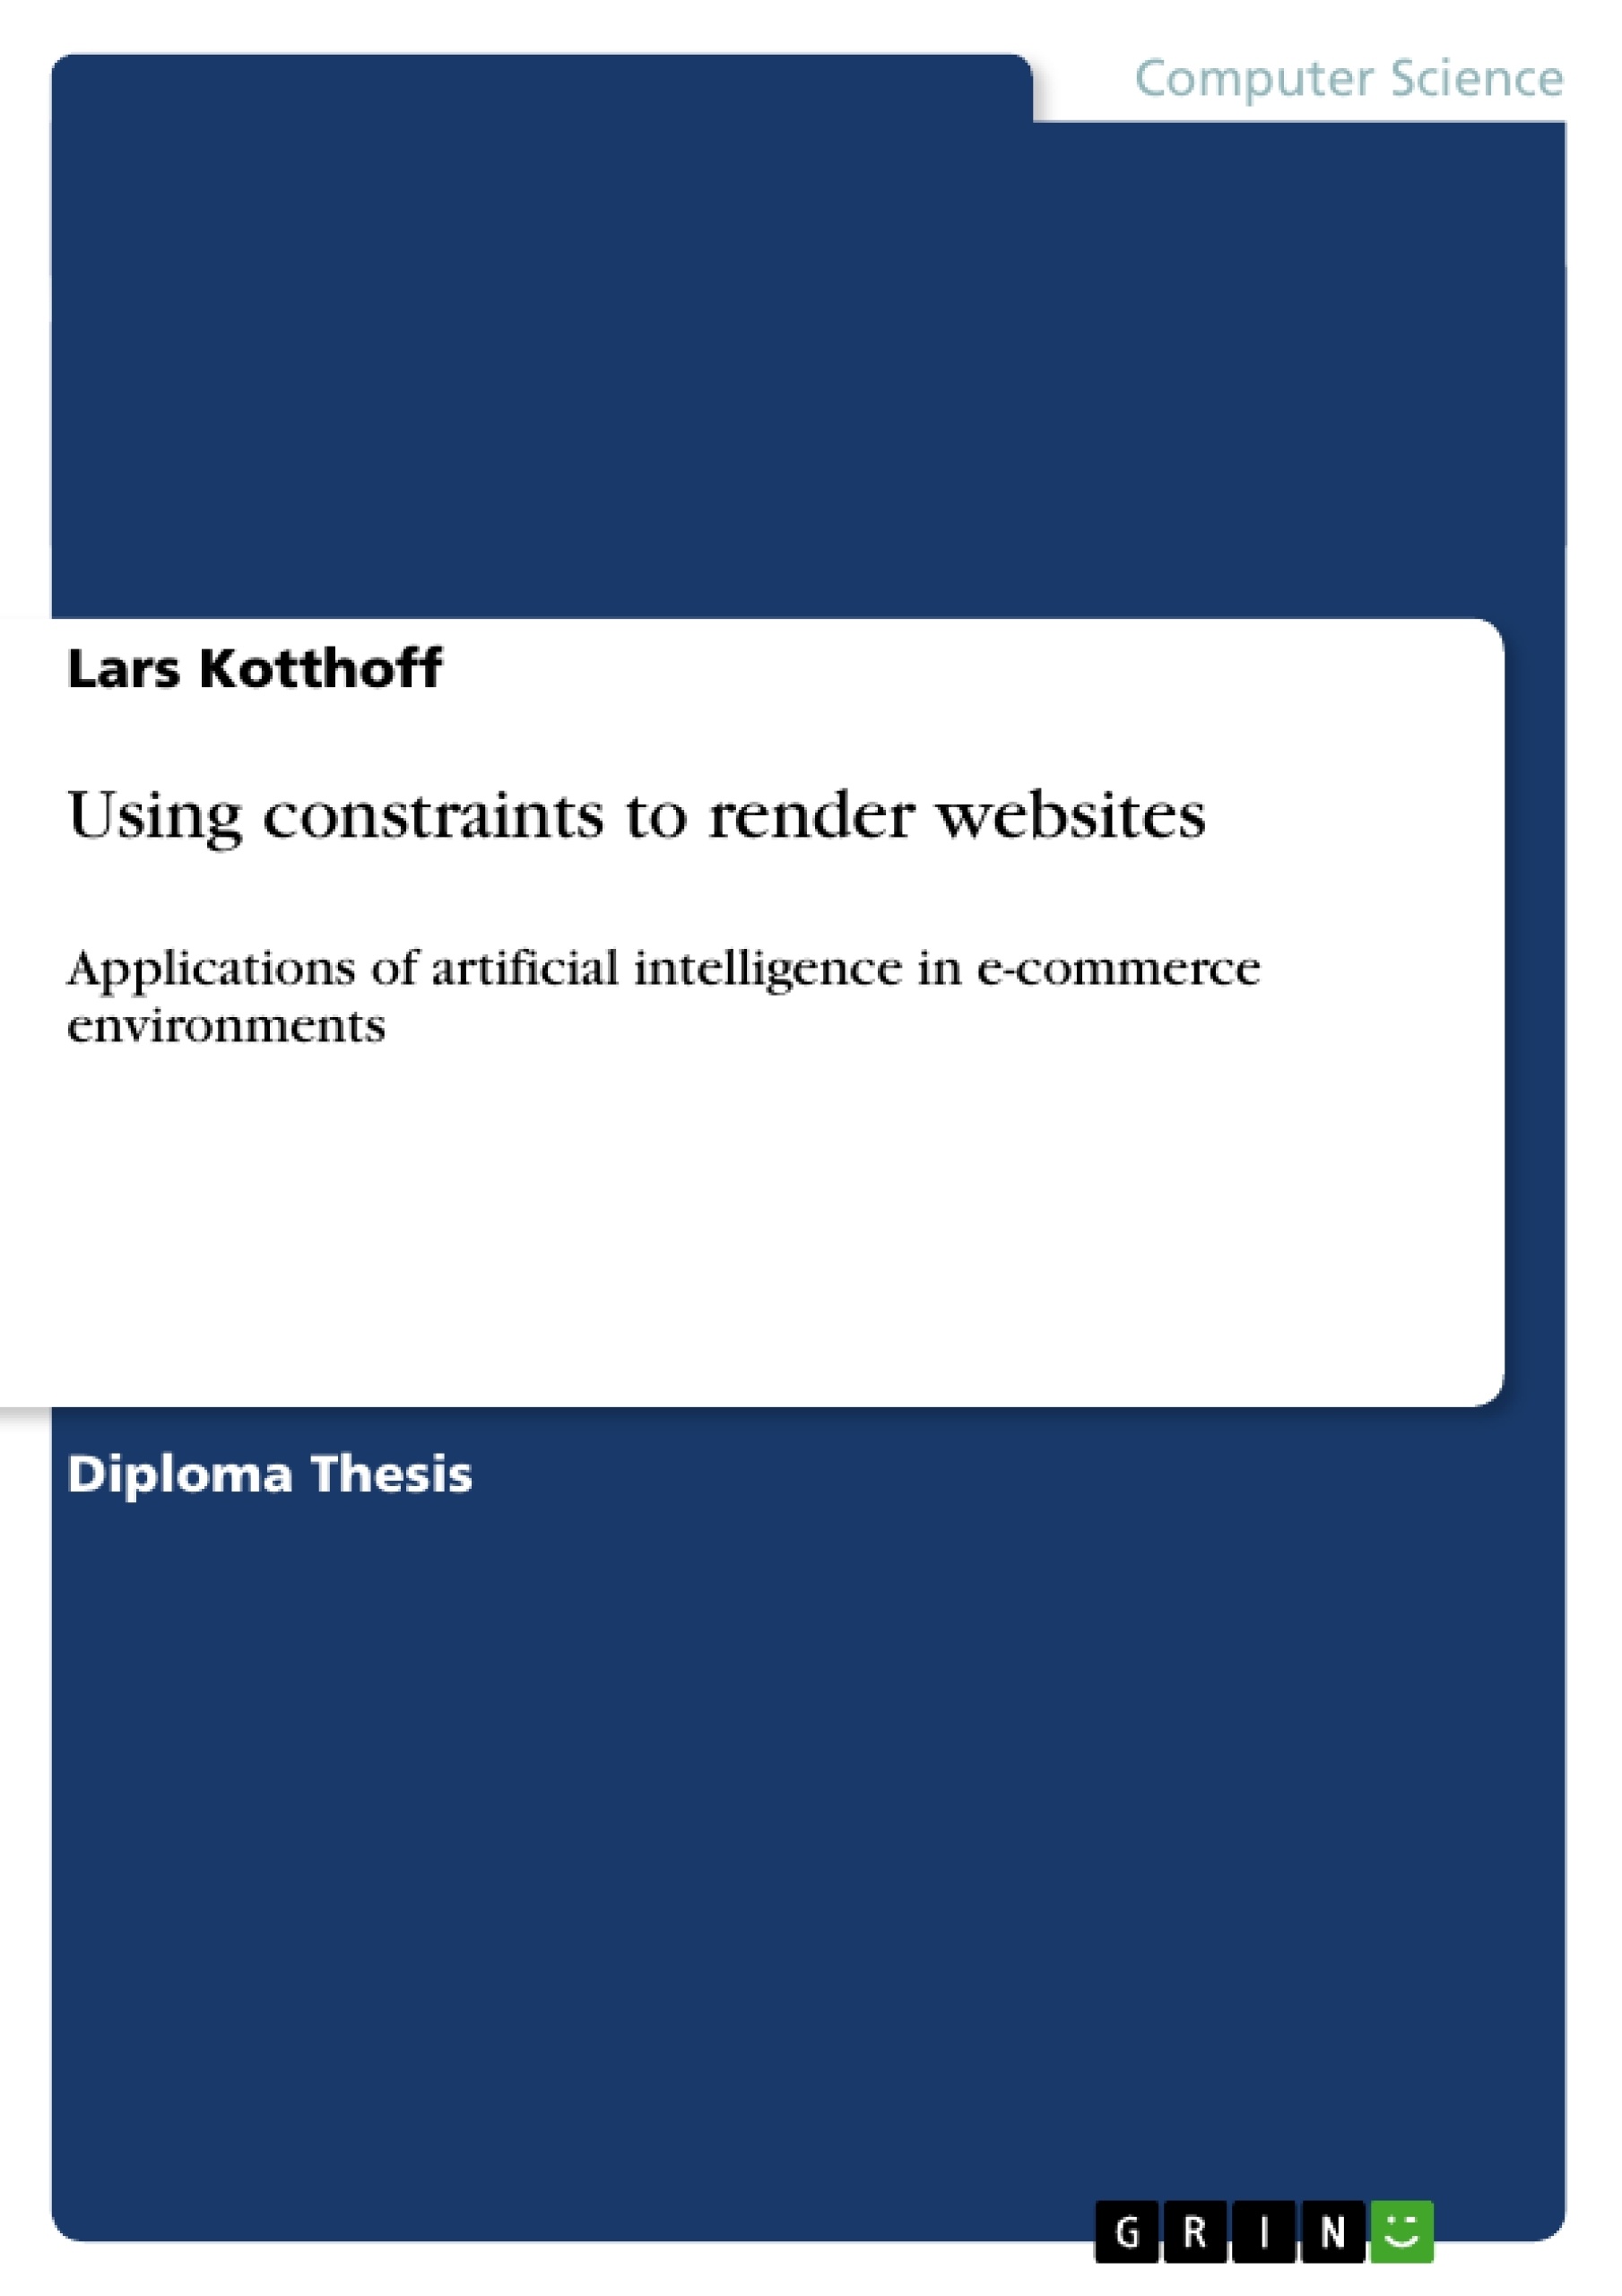 Title: Using constraints to render websites